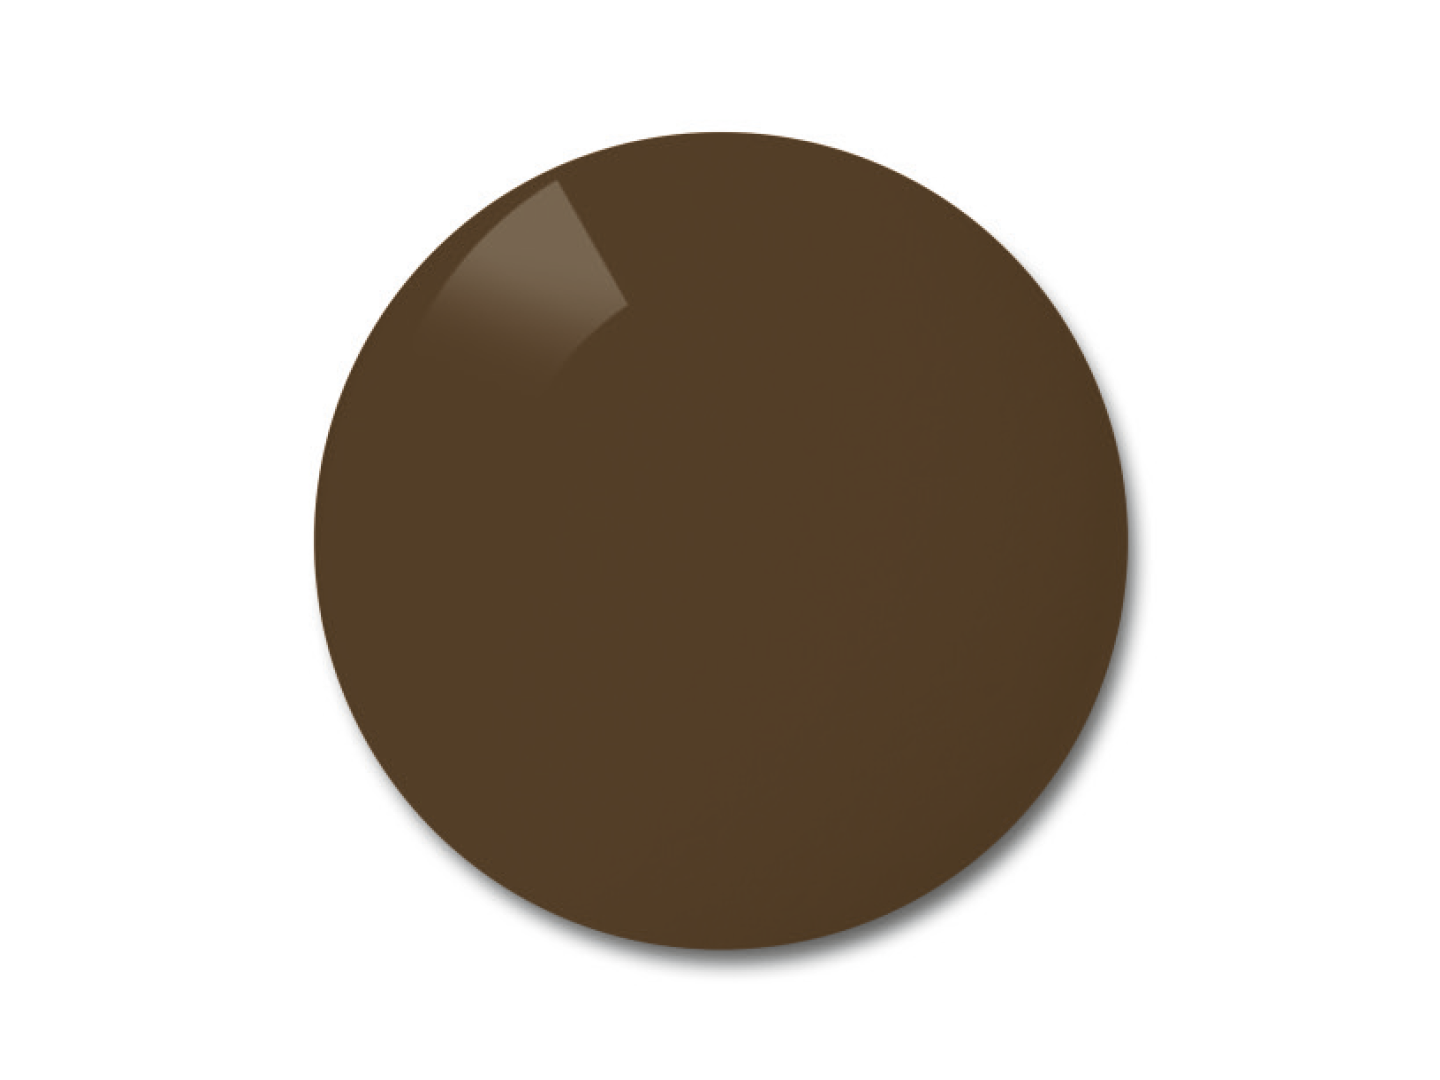 Illustration of ZEISS Polarised Lenses in the colour option brown